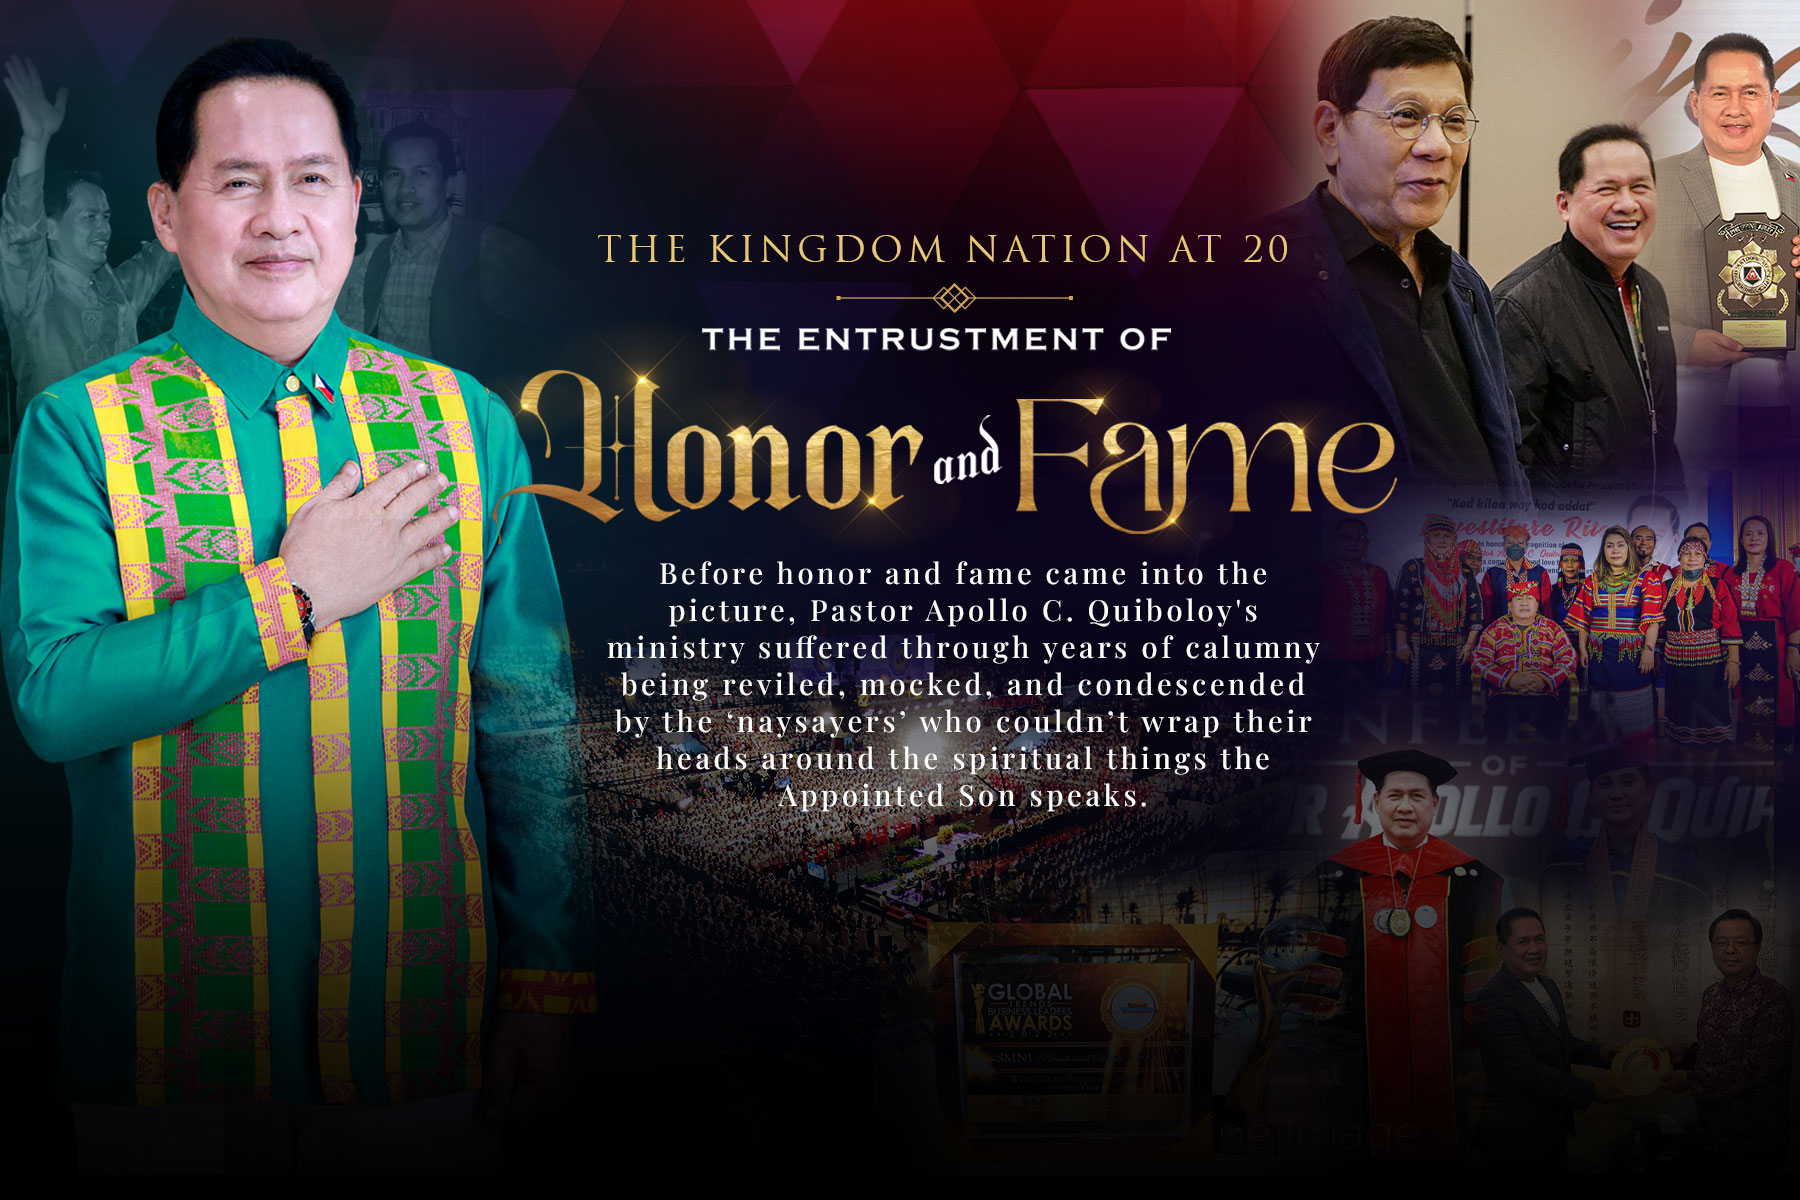 KN HONOR AND FAME Thumbs